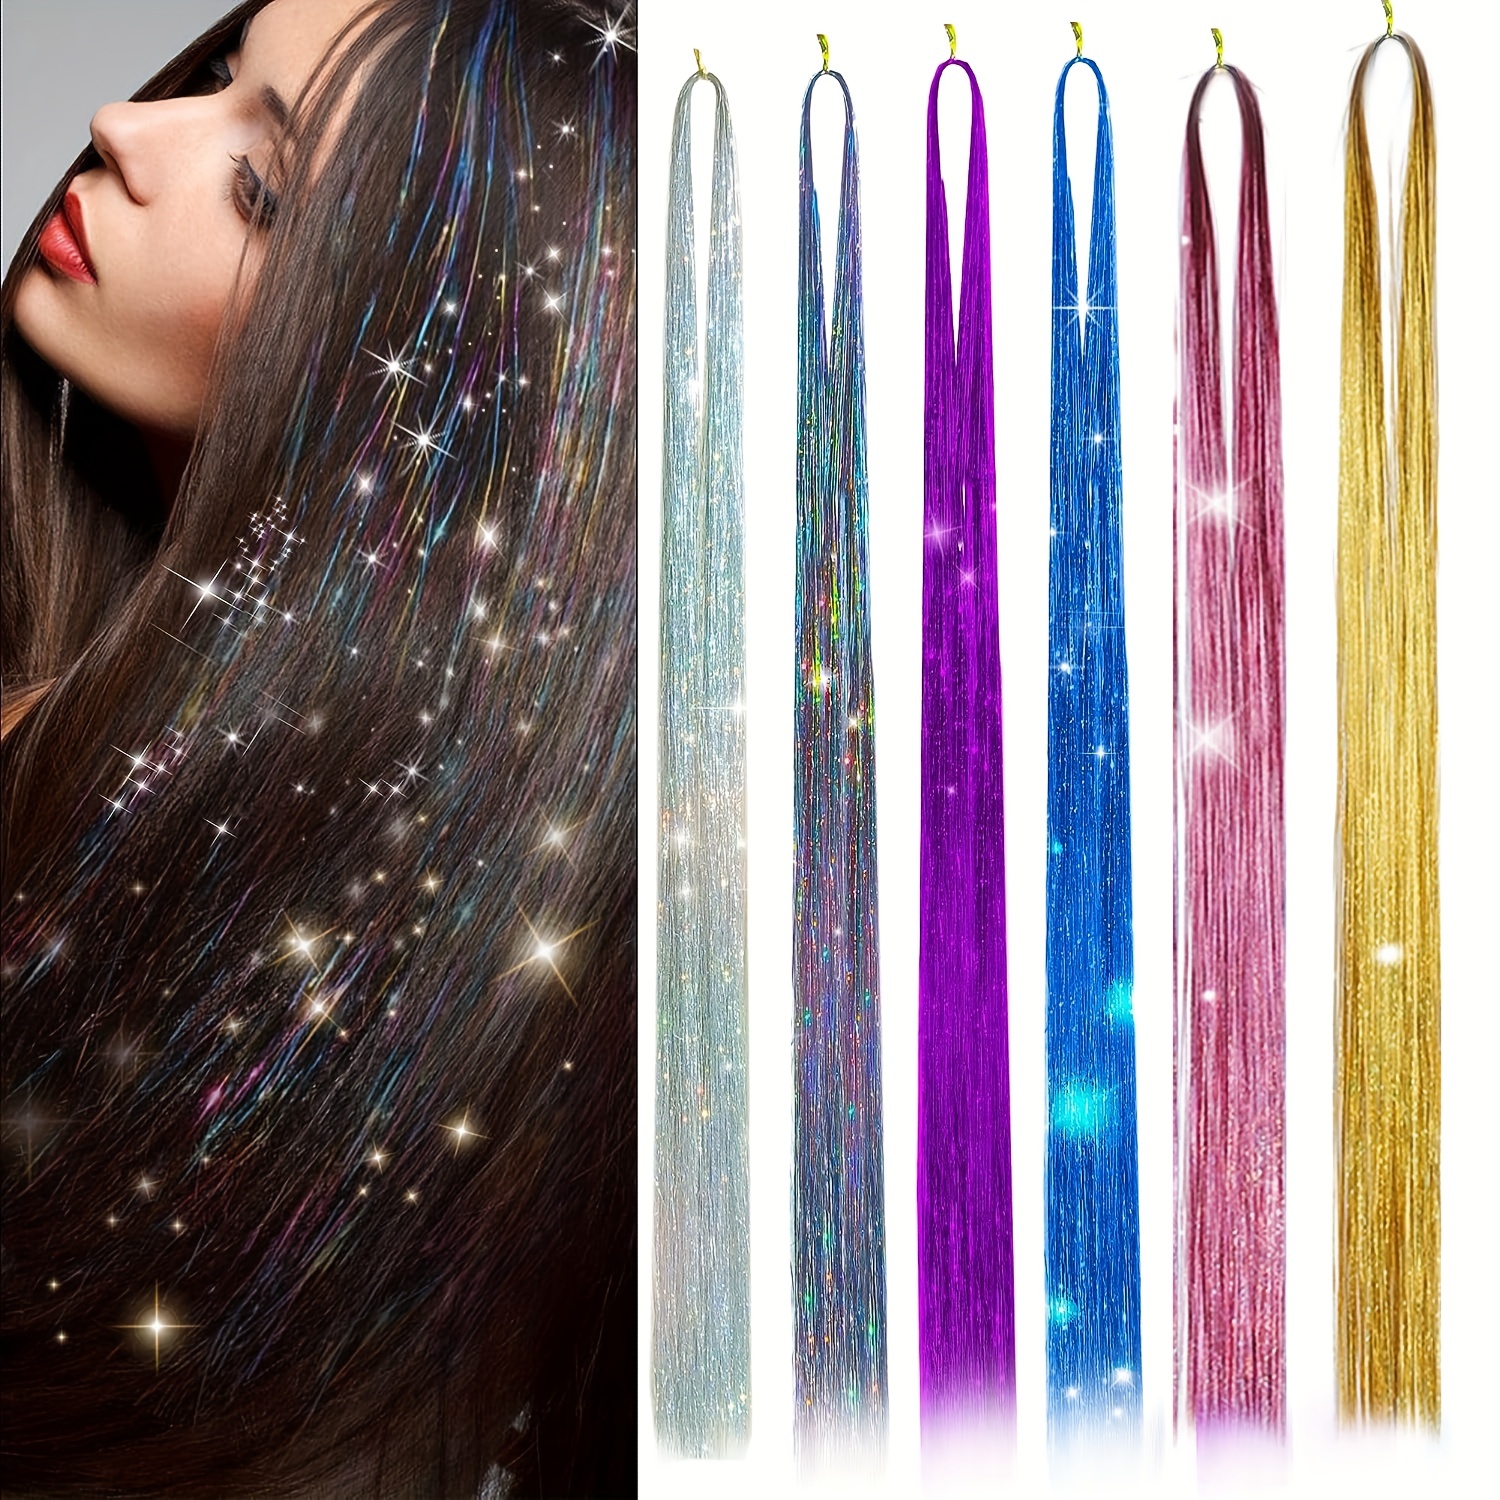 46 Inch Hair Tinsel With Tools 12 Colors 2000 Strands Hair Tinsel Kit  Glitter Hair Extensions Sparkling Shiny Hair Extensions Silk Fairy Hair  Tinsel Strands Kit Hair (46 Inch, 12 Colors)